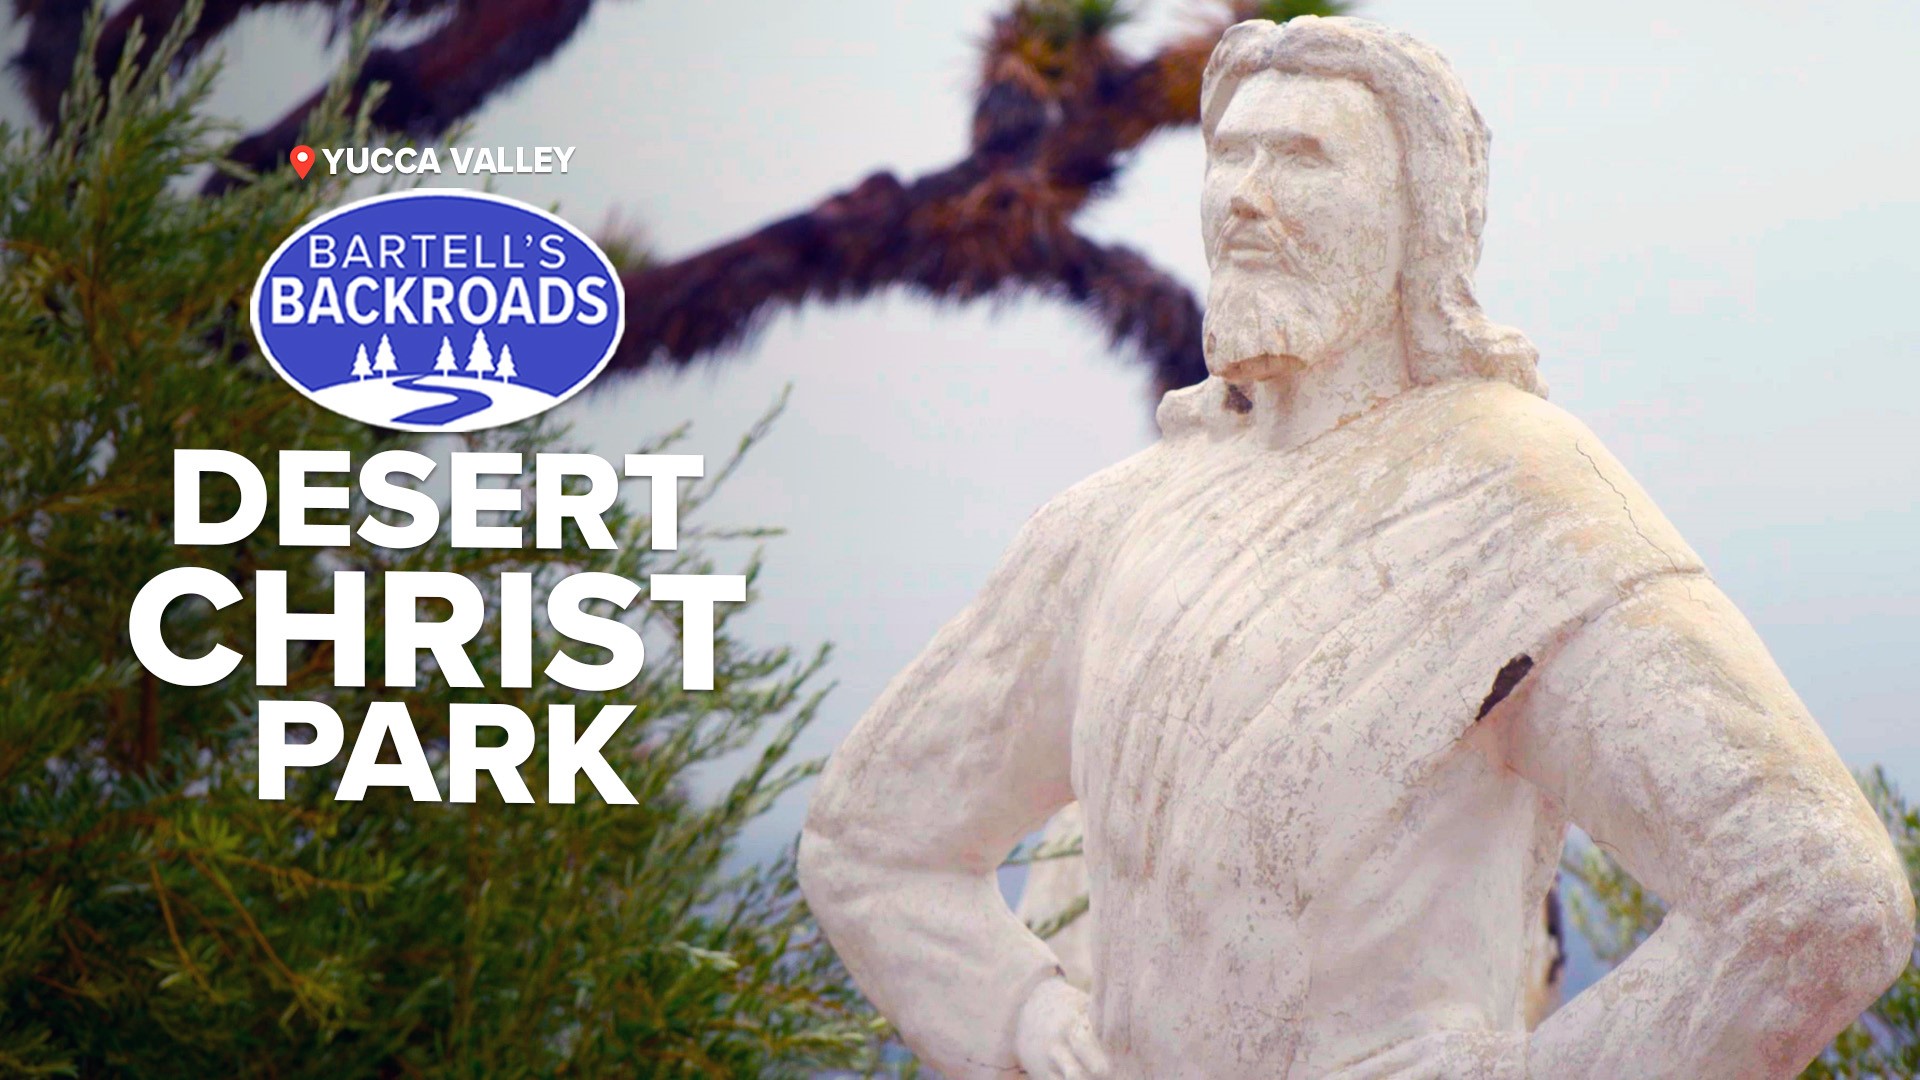 Desert Christ Park in Yucca Valley's spiritual roadside attraction is a peaceful pit stop.